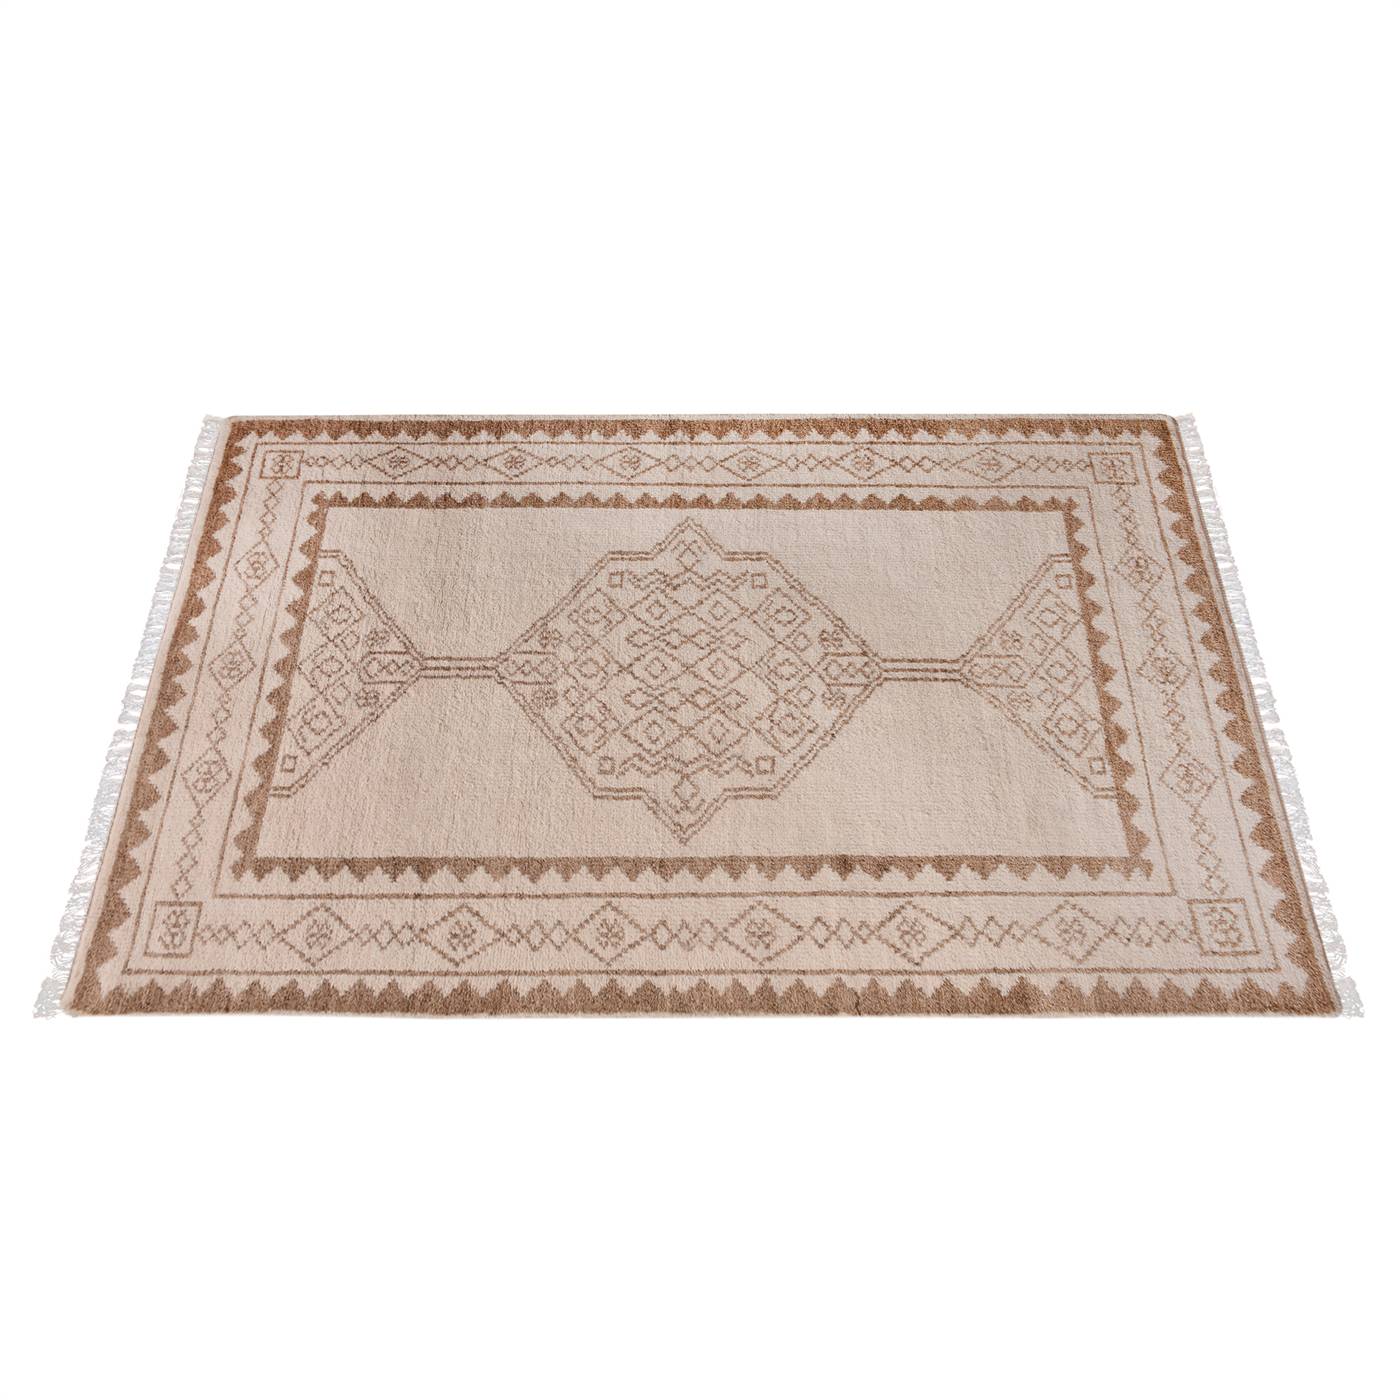 Area Rug, Bedroom Rug, Living Room Rug, Living Area Rug, Indian Rug, Office Carpet, Office Rug, Shop Rug Online, Natural White, Brown , Nz Wool , Hand Knotted , Handknotted, All Cut, Intricate 